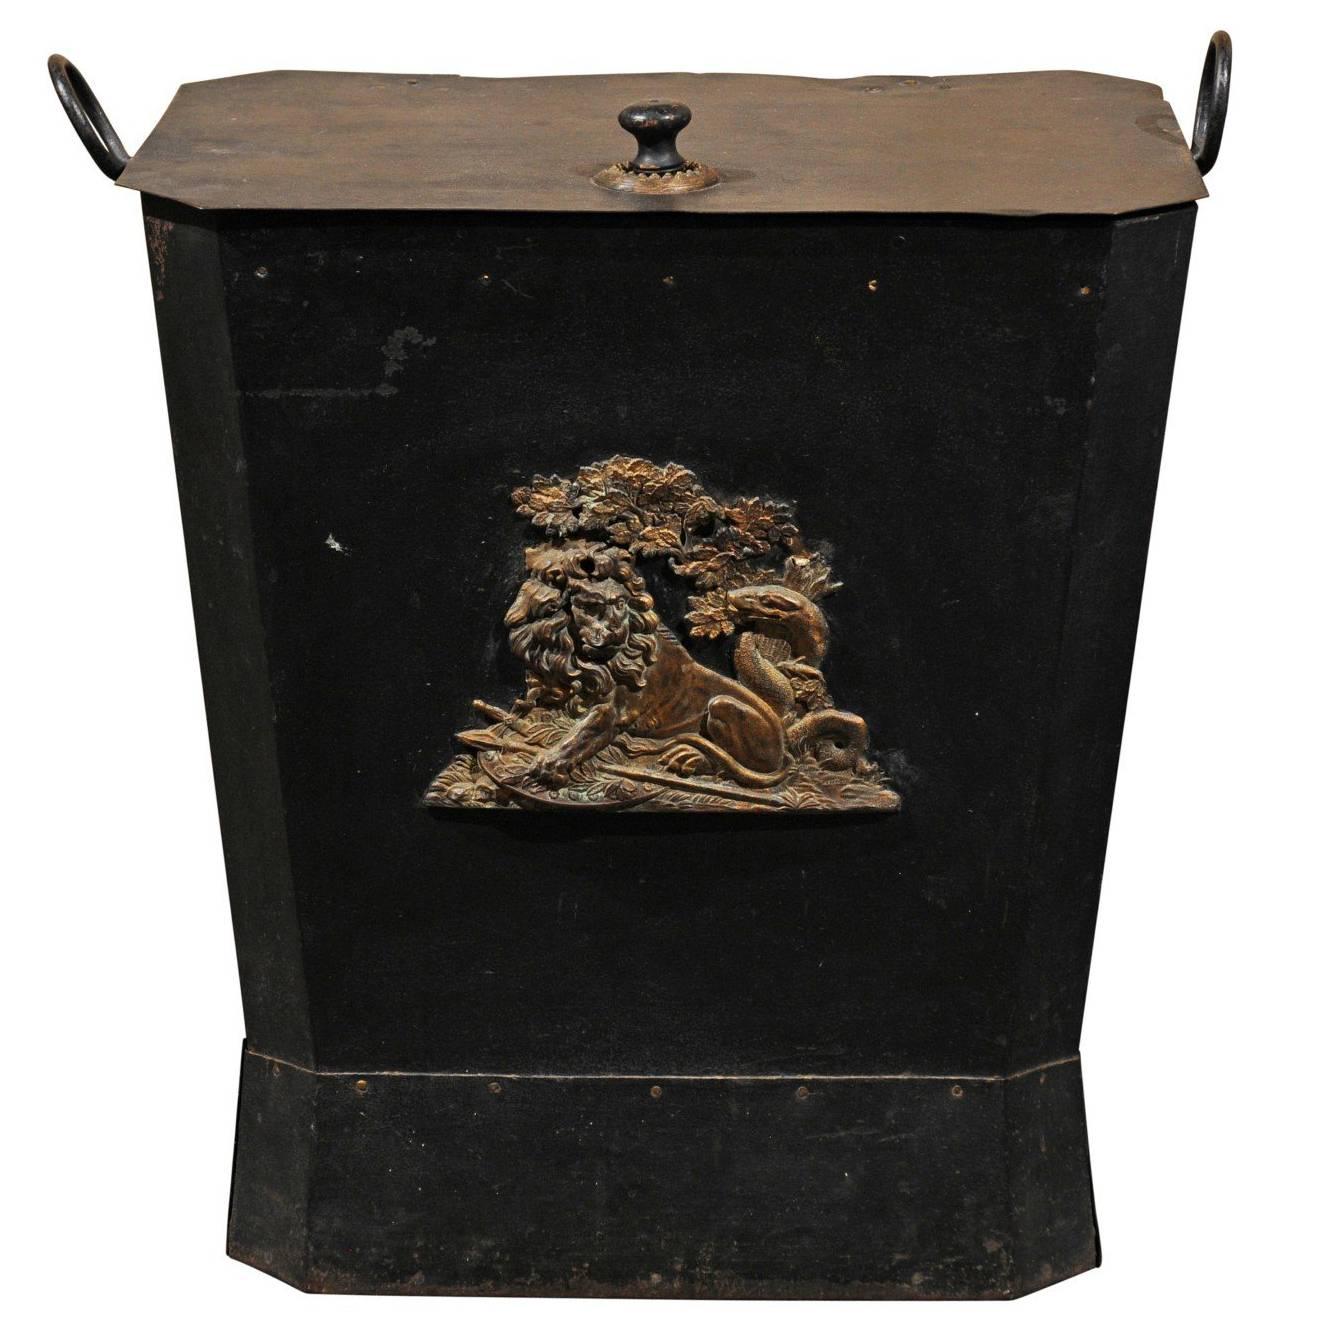 English Black Metal Coal Scuttle with Bronze Lion Reclining under a Tree